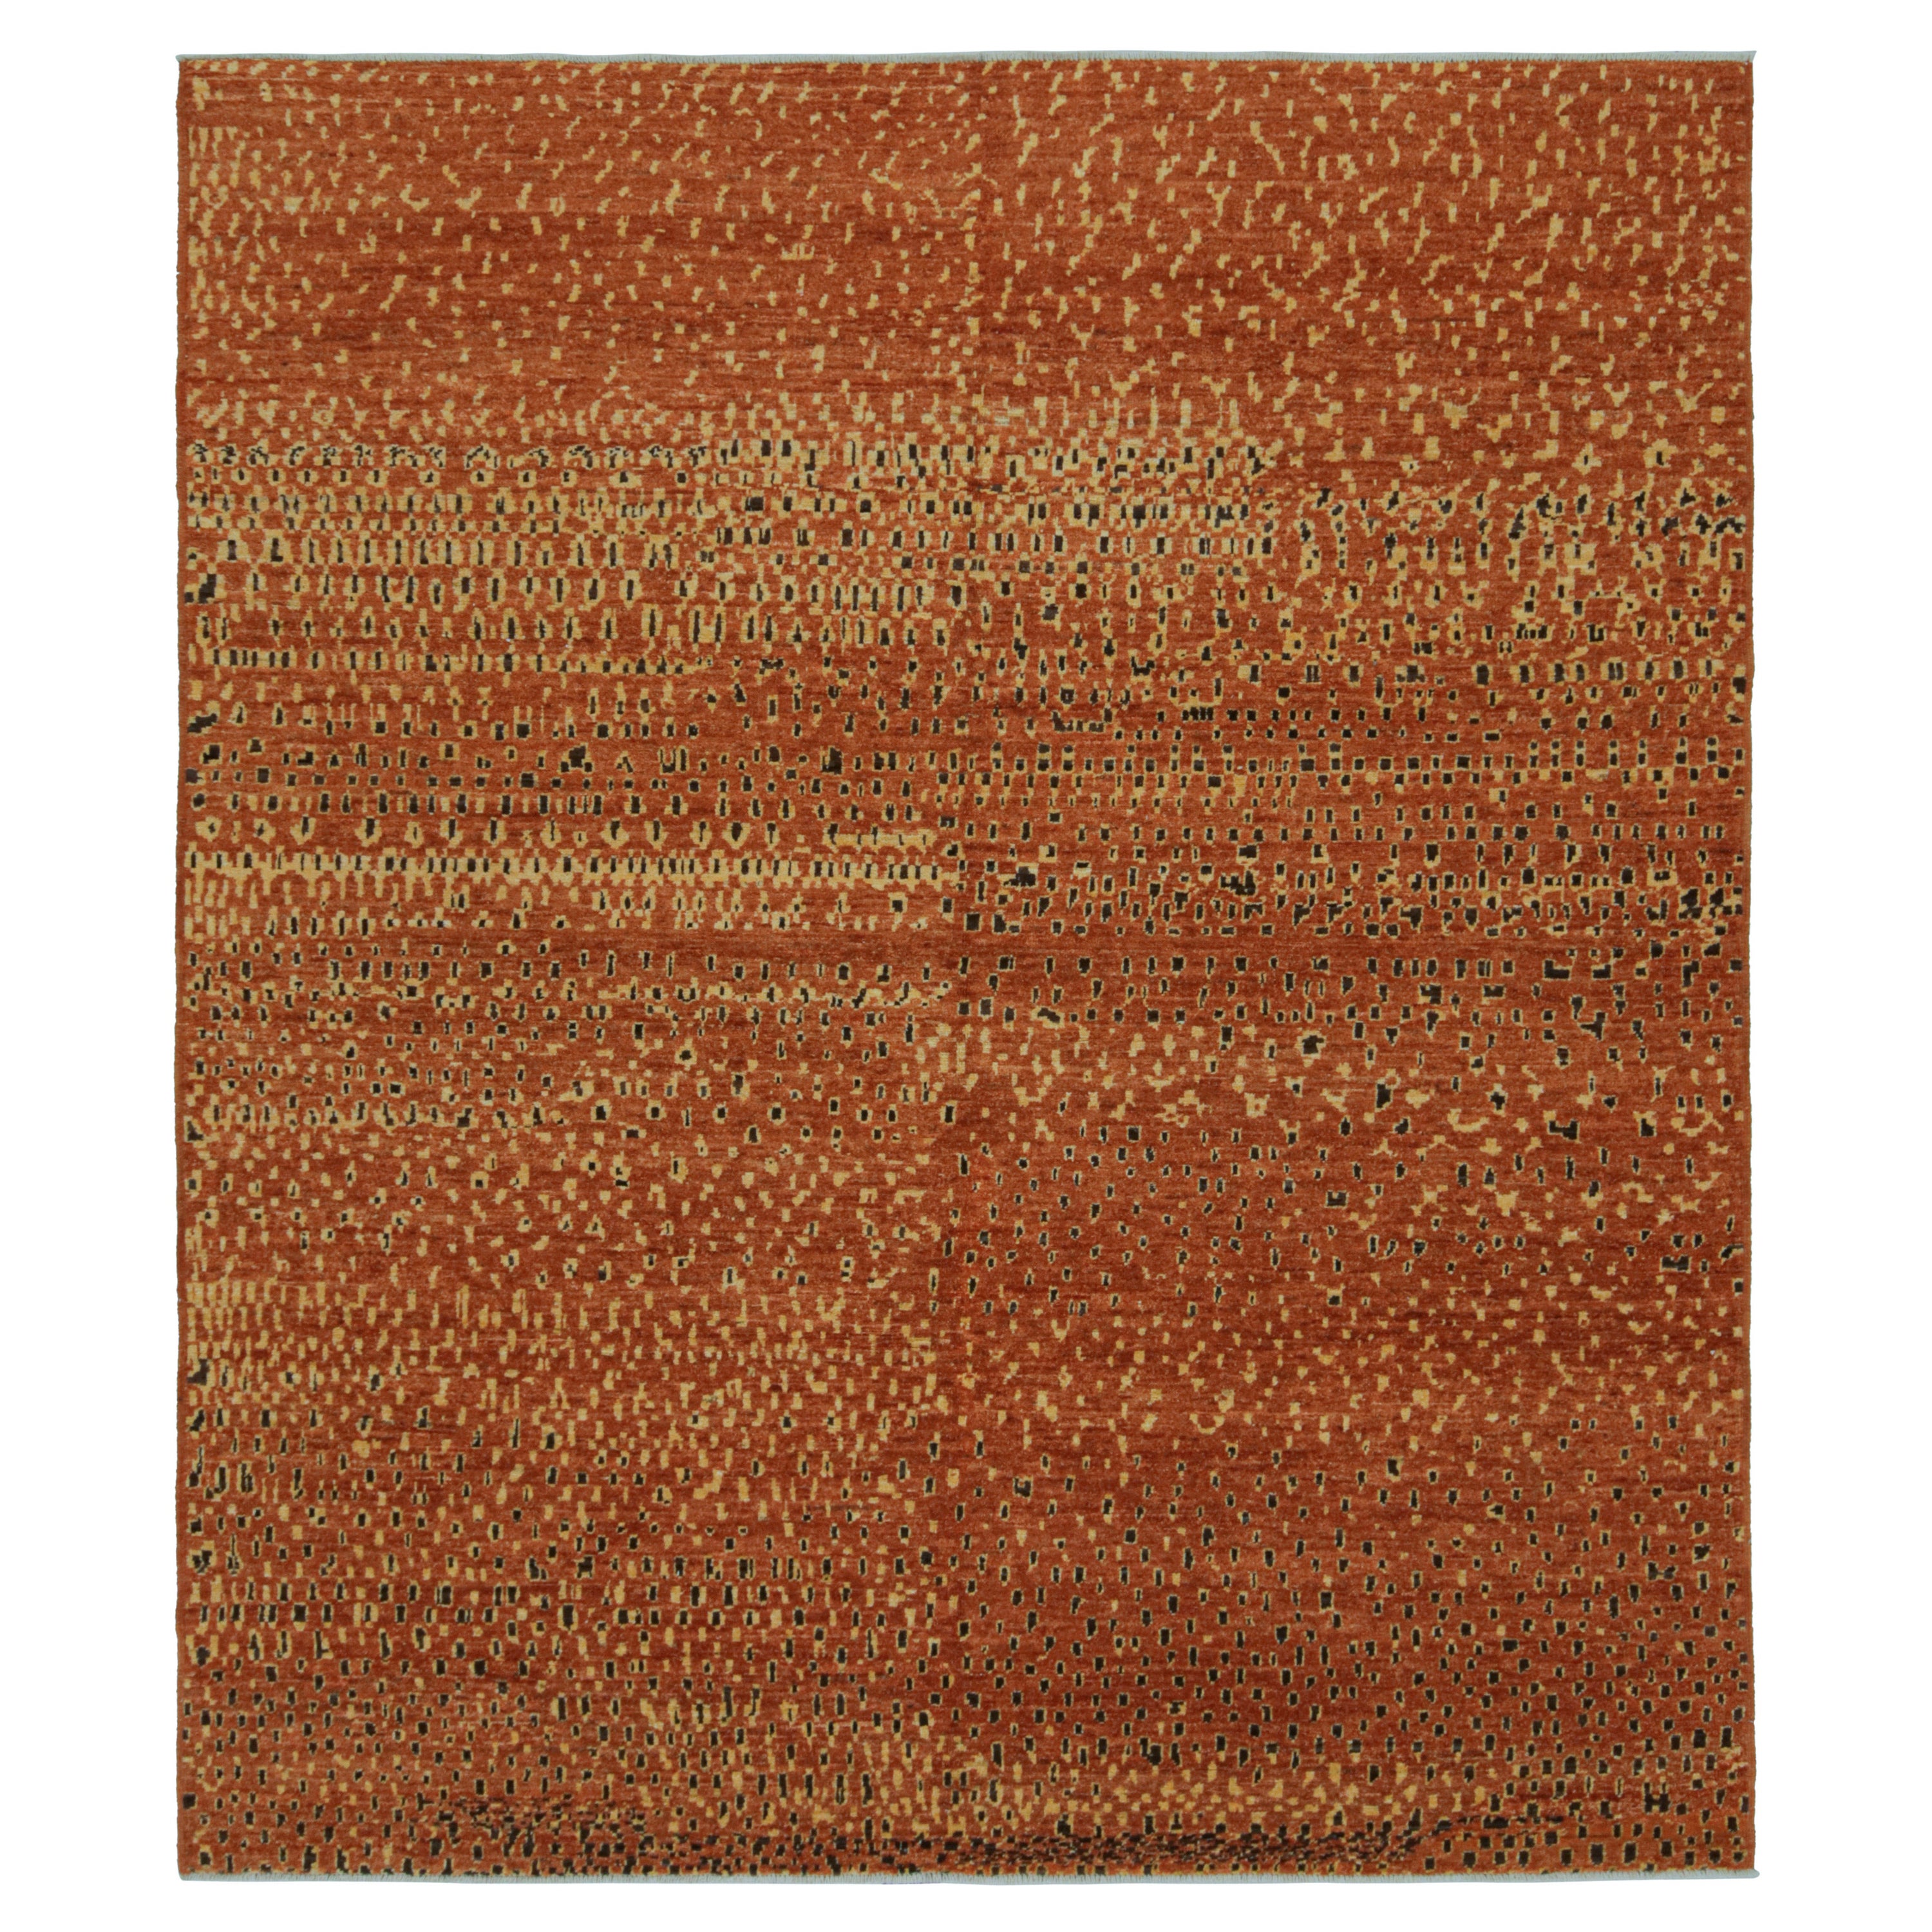 Rug & Kilim’s Moroccan Style Rug with Brown and Gold Geometric Patterns